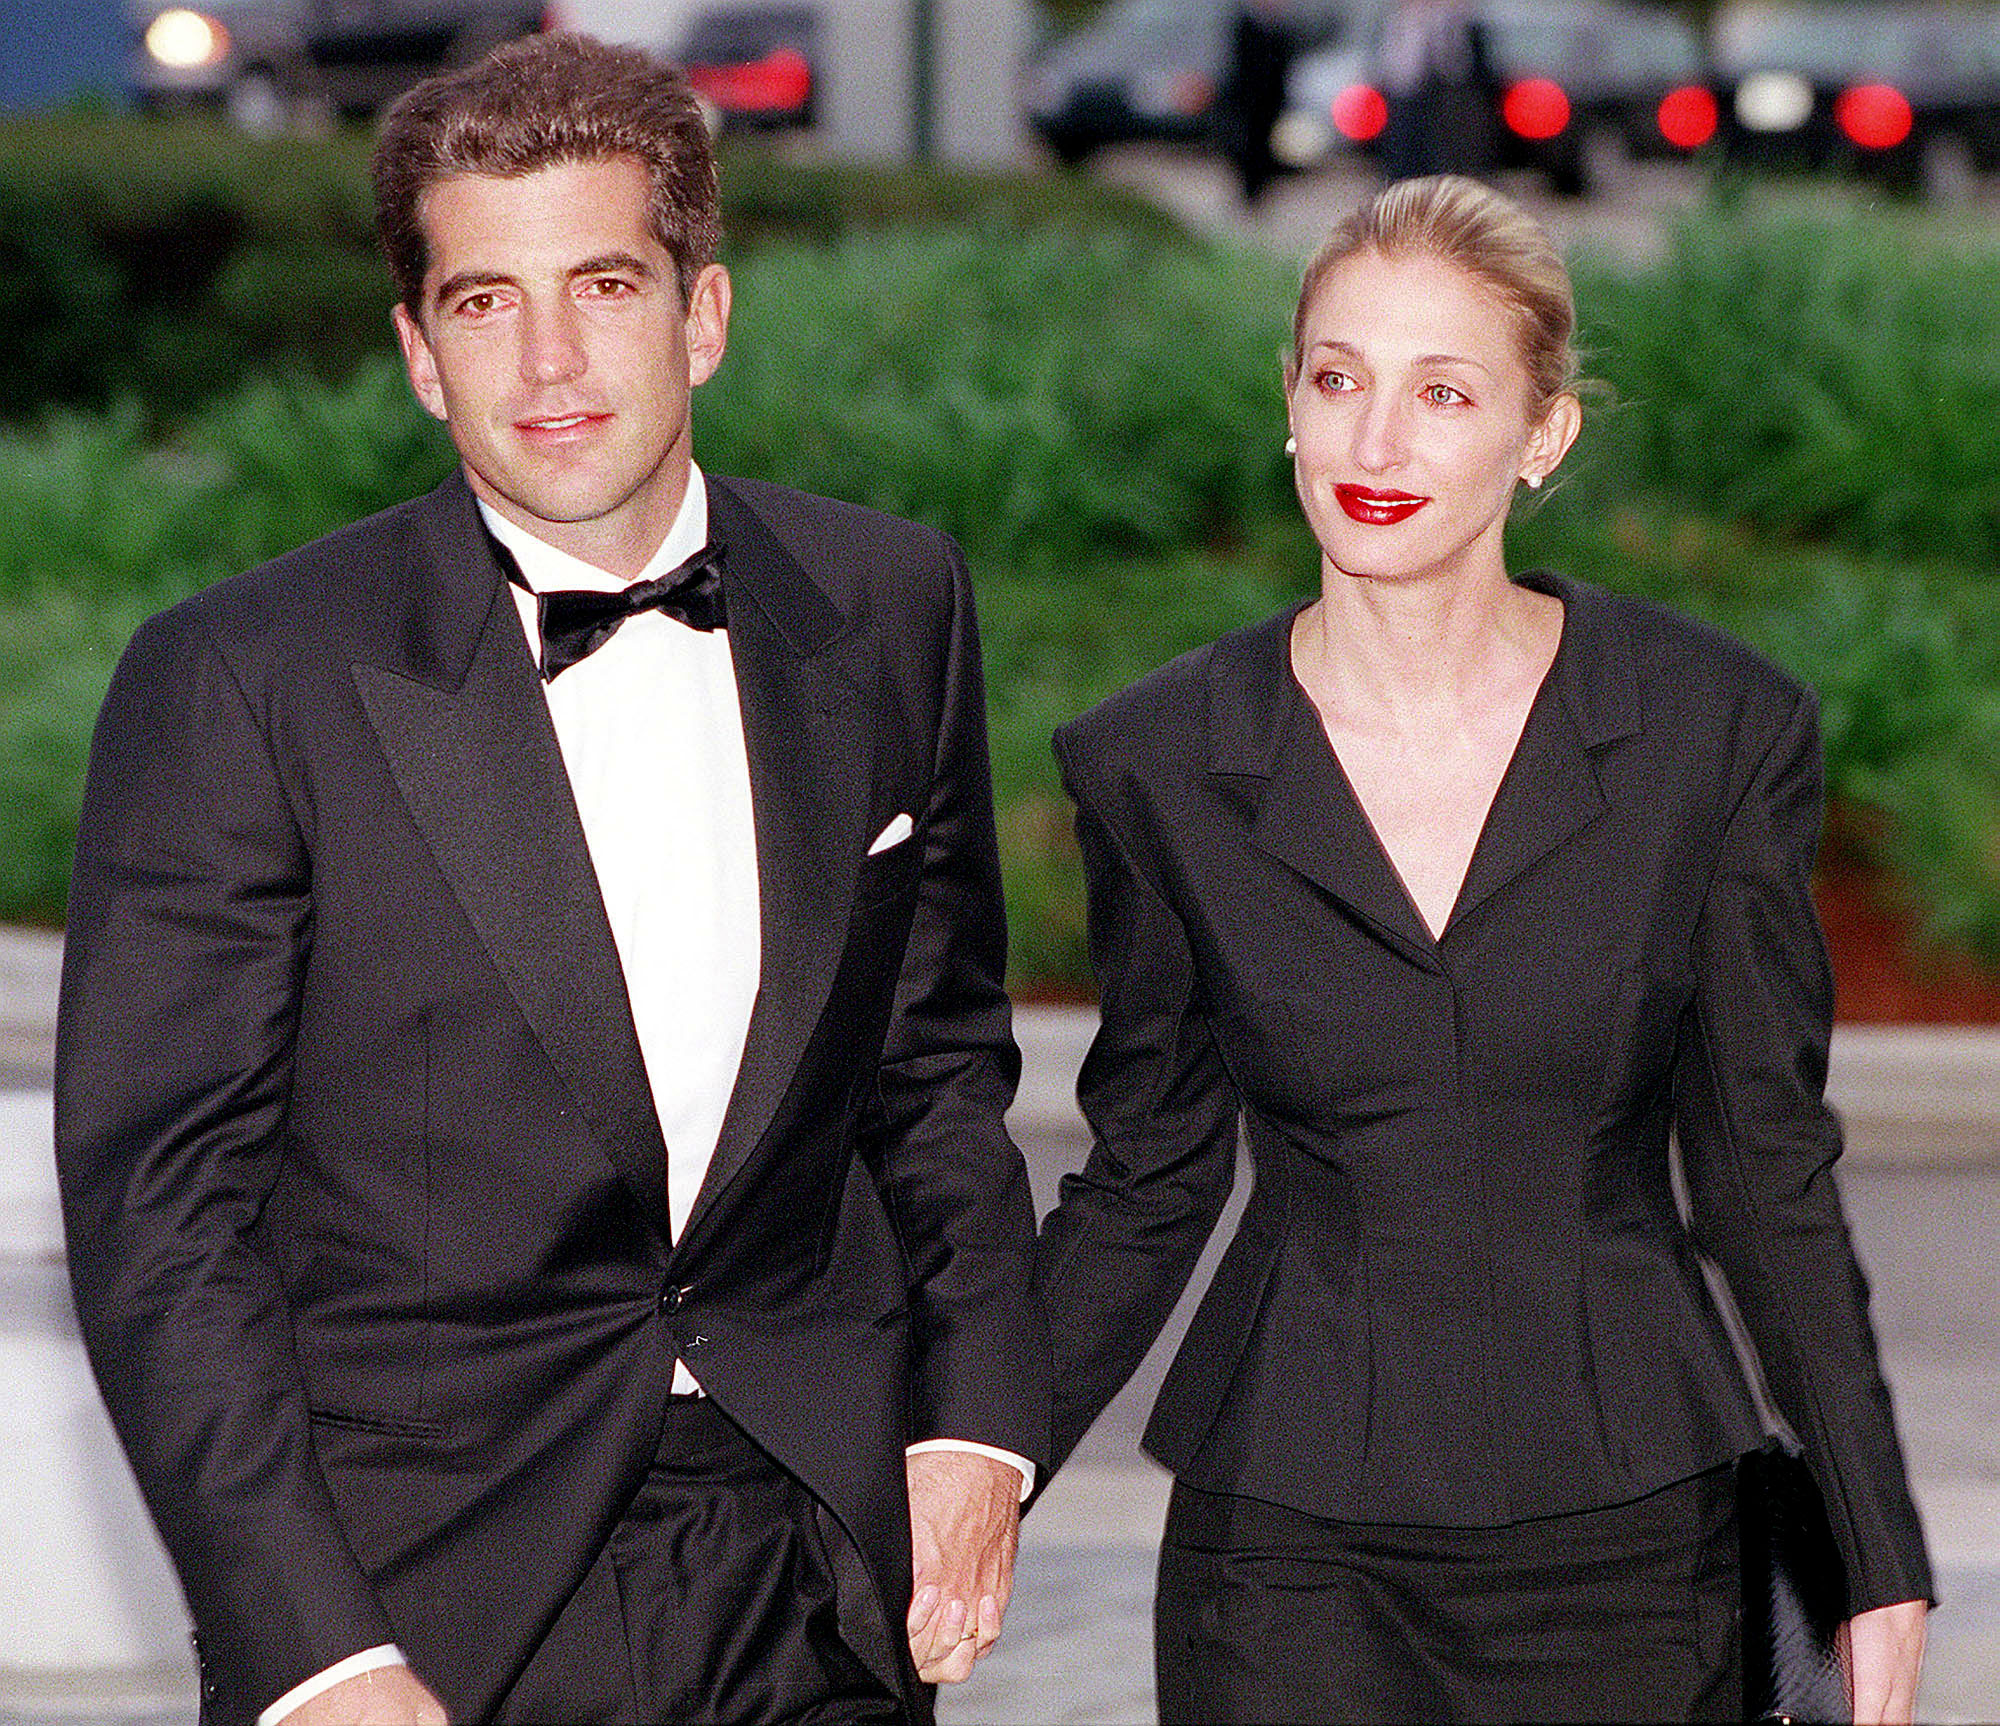 John F. Kennedy, Jr. and his wife Carolyn Bessette Kennedy at the annual John F. Kennedy Library Foundation dinner on Sunday, May 23, 1999 | Source: Getty Images